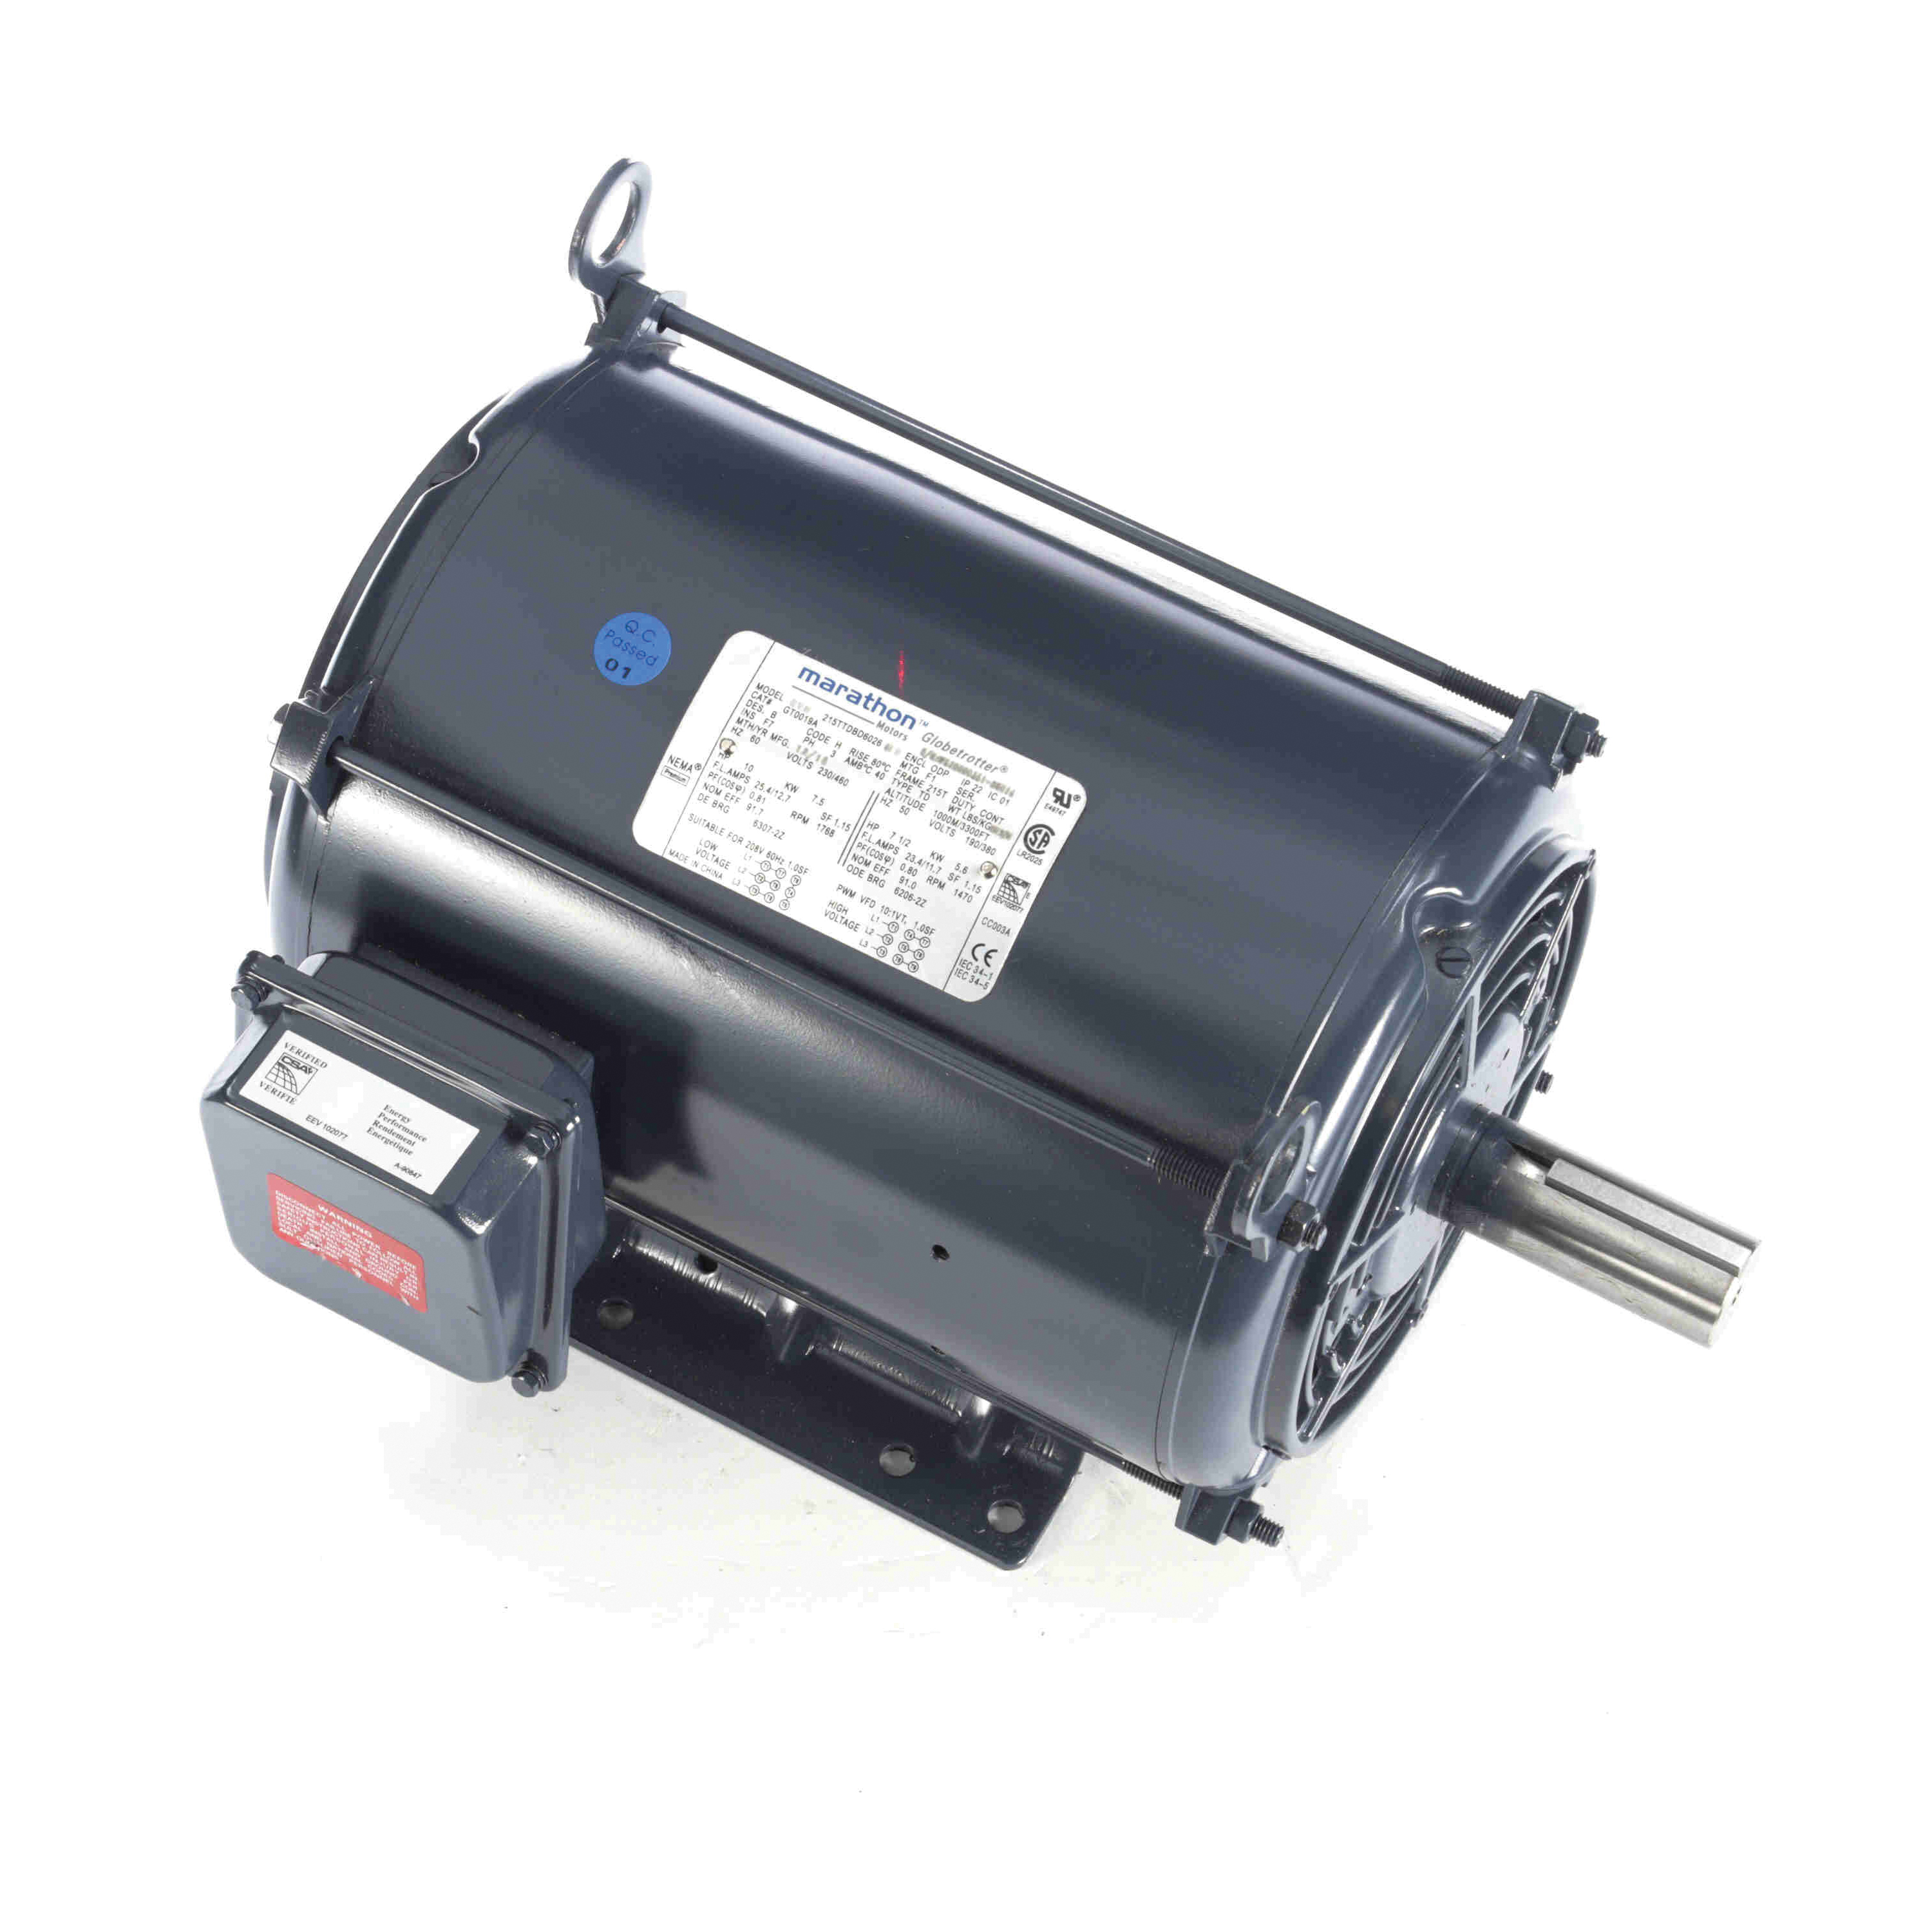 Marathon® Globetrotter® GT0019A General Purpose Motor, 208 to 230/460 V, 12.7/25.4 to 27.7 A, 7.5 kW, 10 hp, 60 Hz